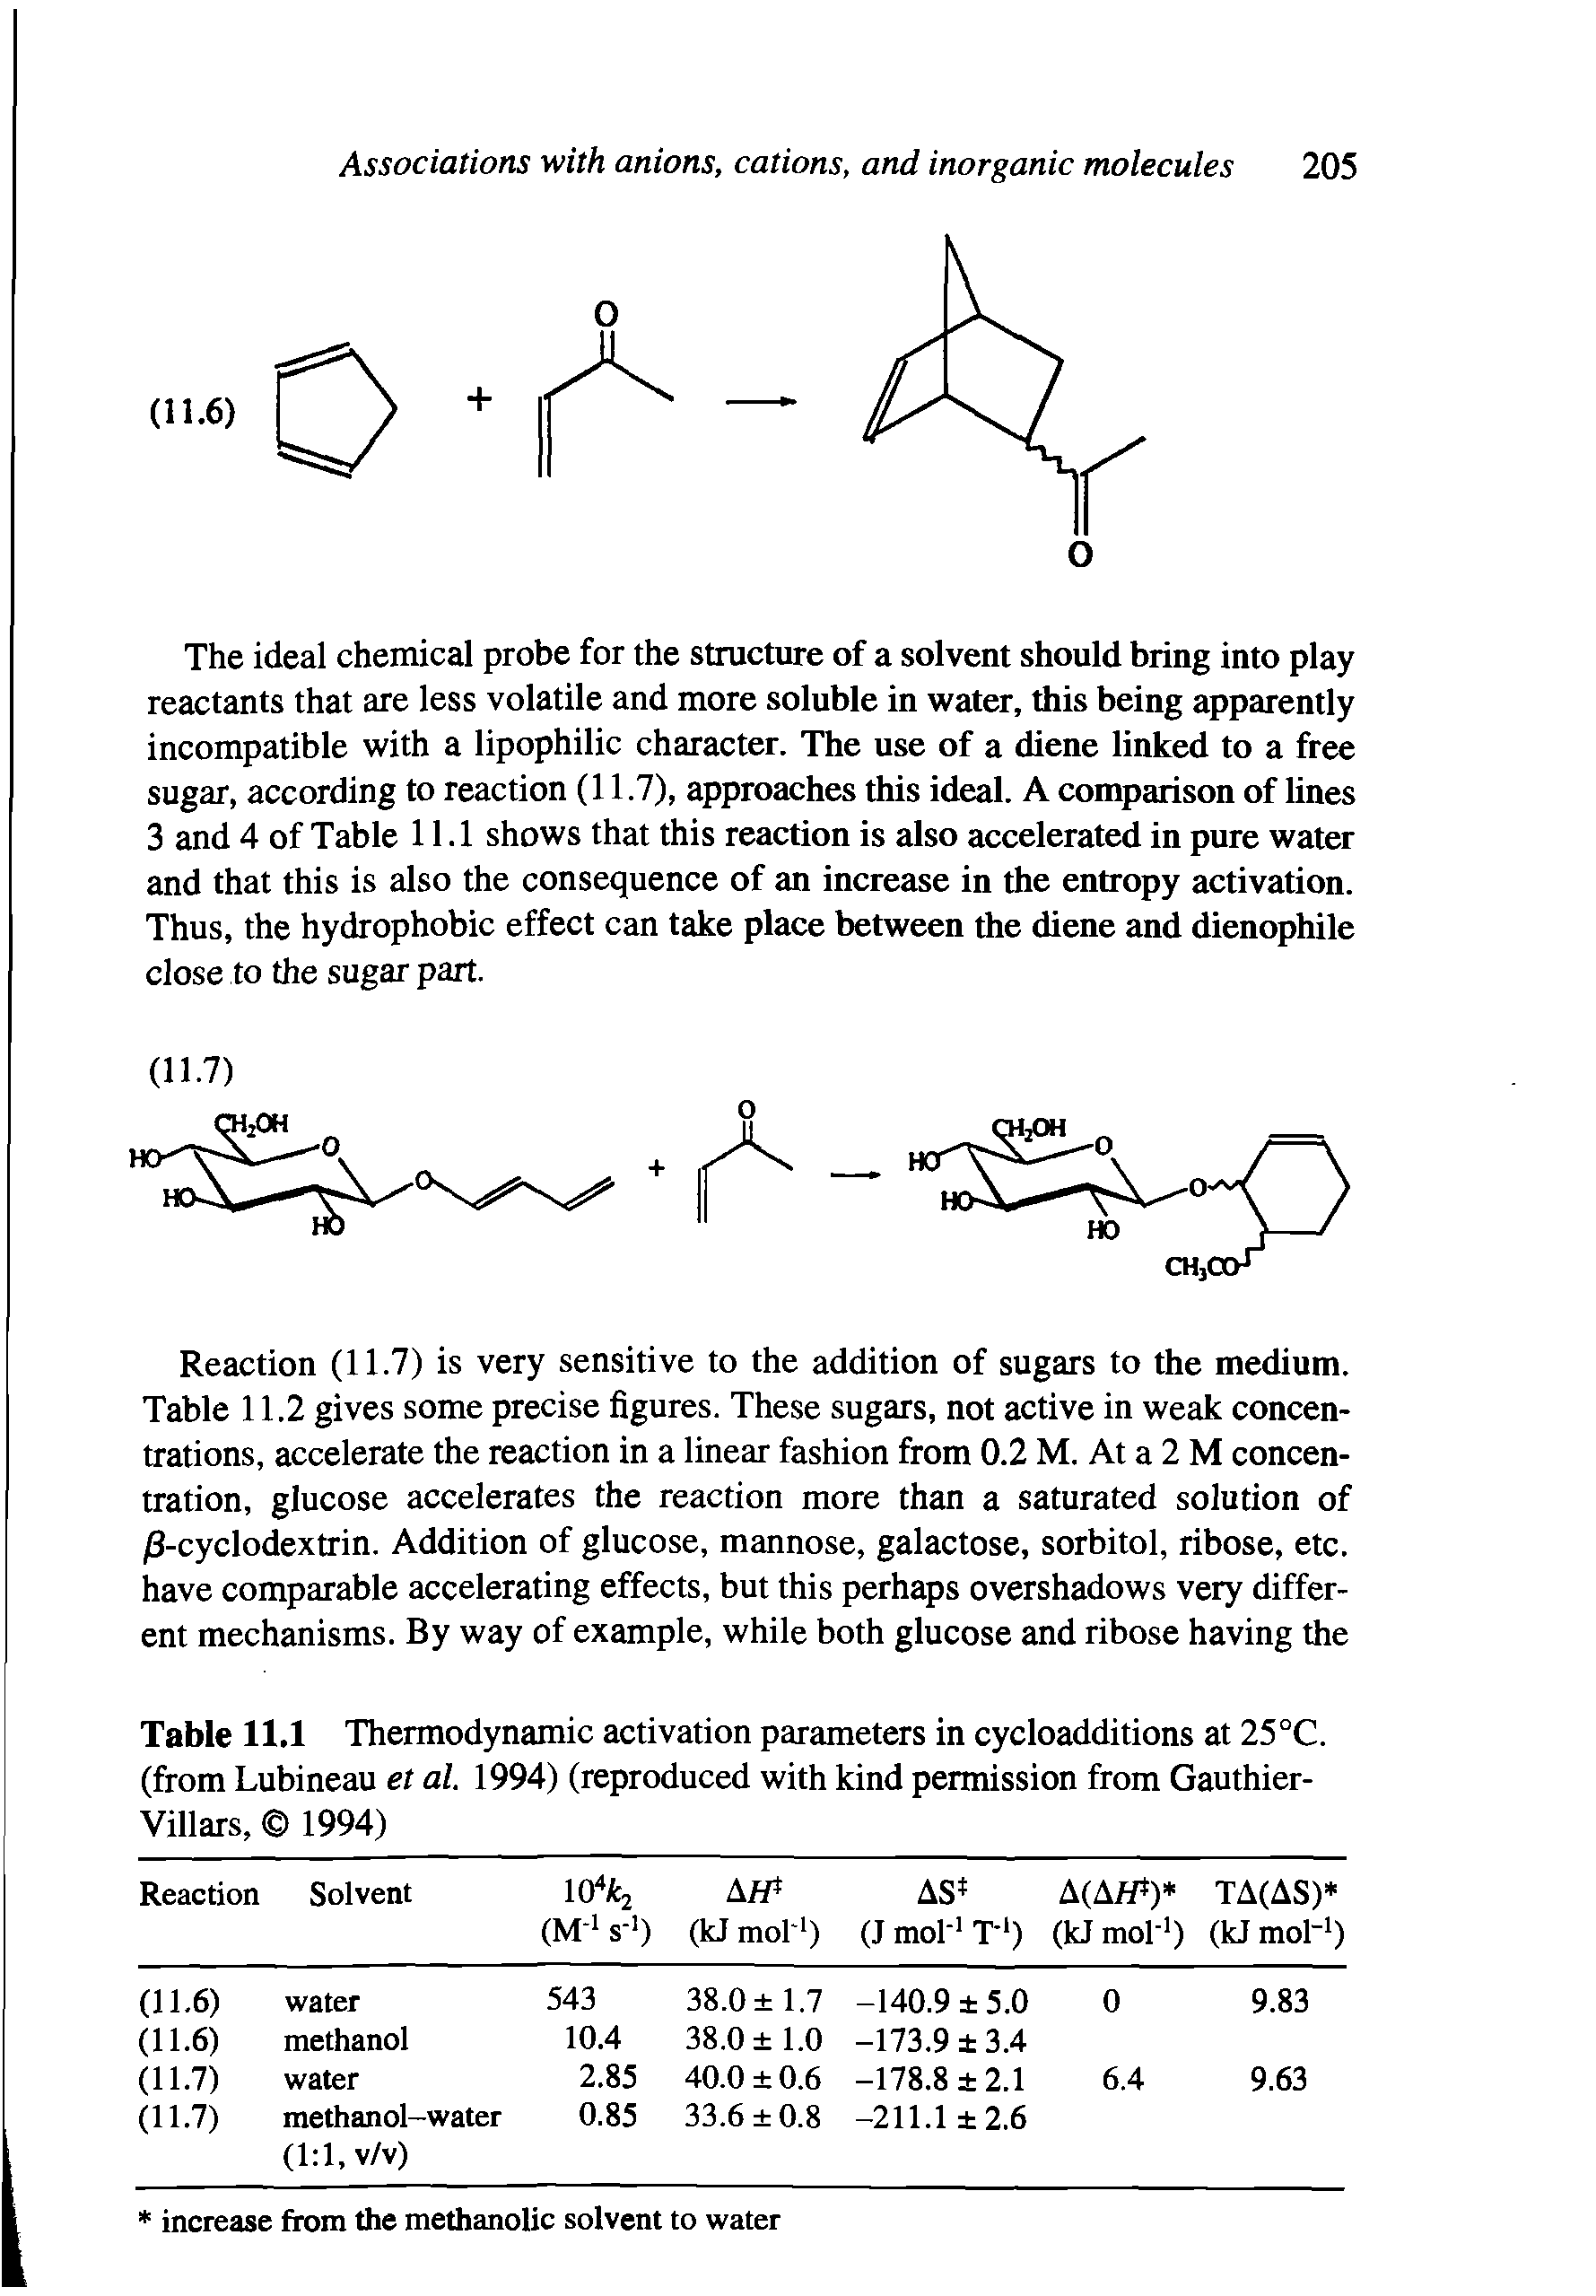 Table 11.1 Thermodynamic activation parameters in cycloadditions at 25°C. (from Lubineau et al. 1994) (reproduced with kind permission from Gauthier-Villars, 1994)...